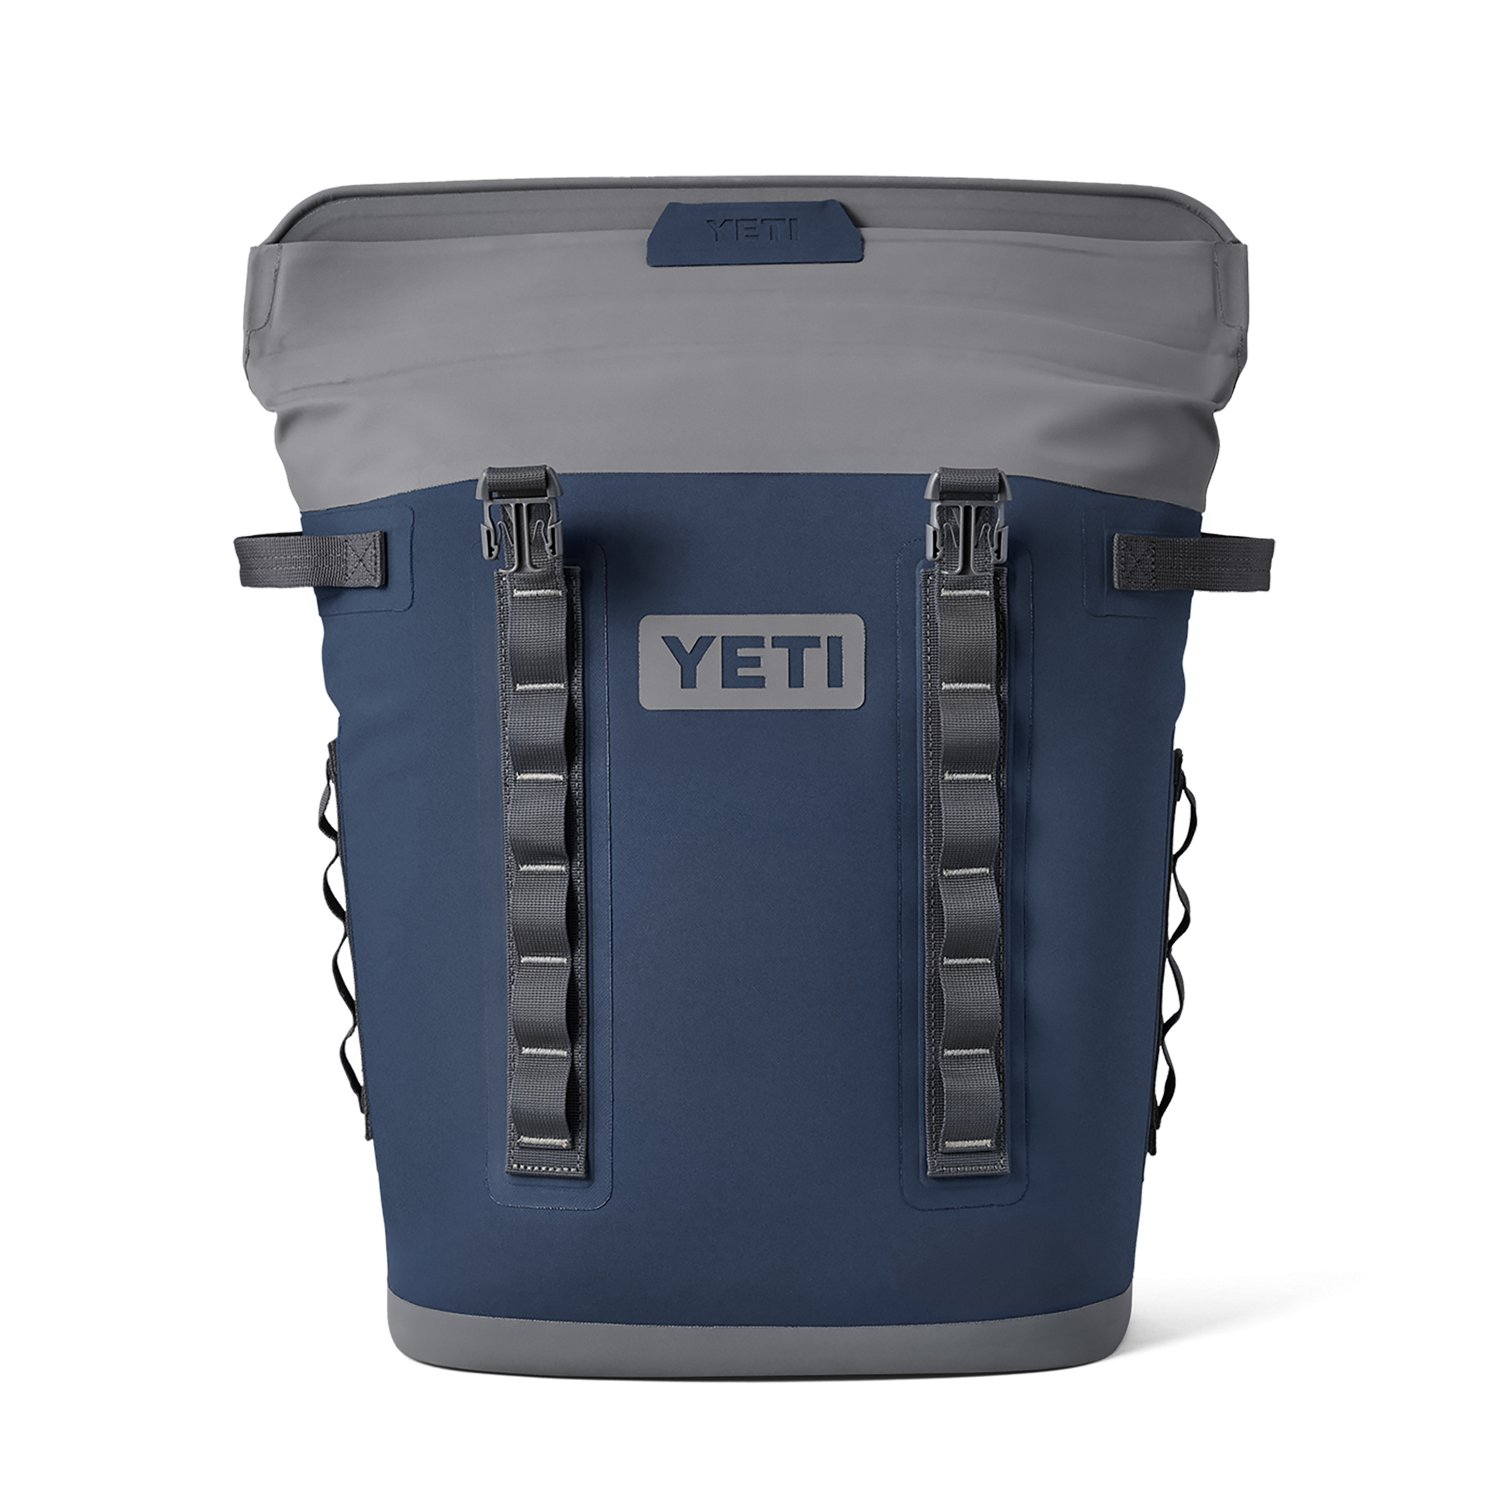 https://academy.scene7.com/is/image/academy//coolers/yeti-hopper-backpack-m20-20-soft-cooler-18050125007-blue/cc885784fe7f44fb926dc1e538ee0de1?$pdp-mobile-gallery-ng$